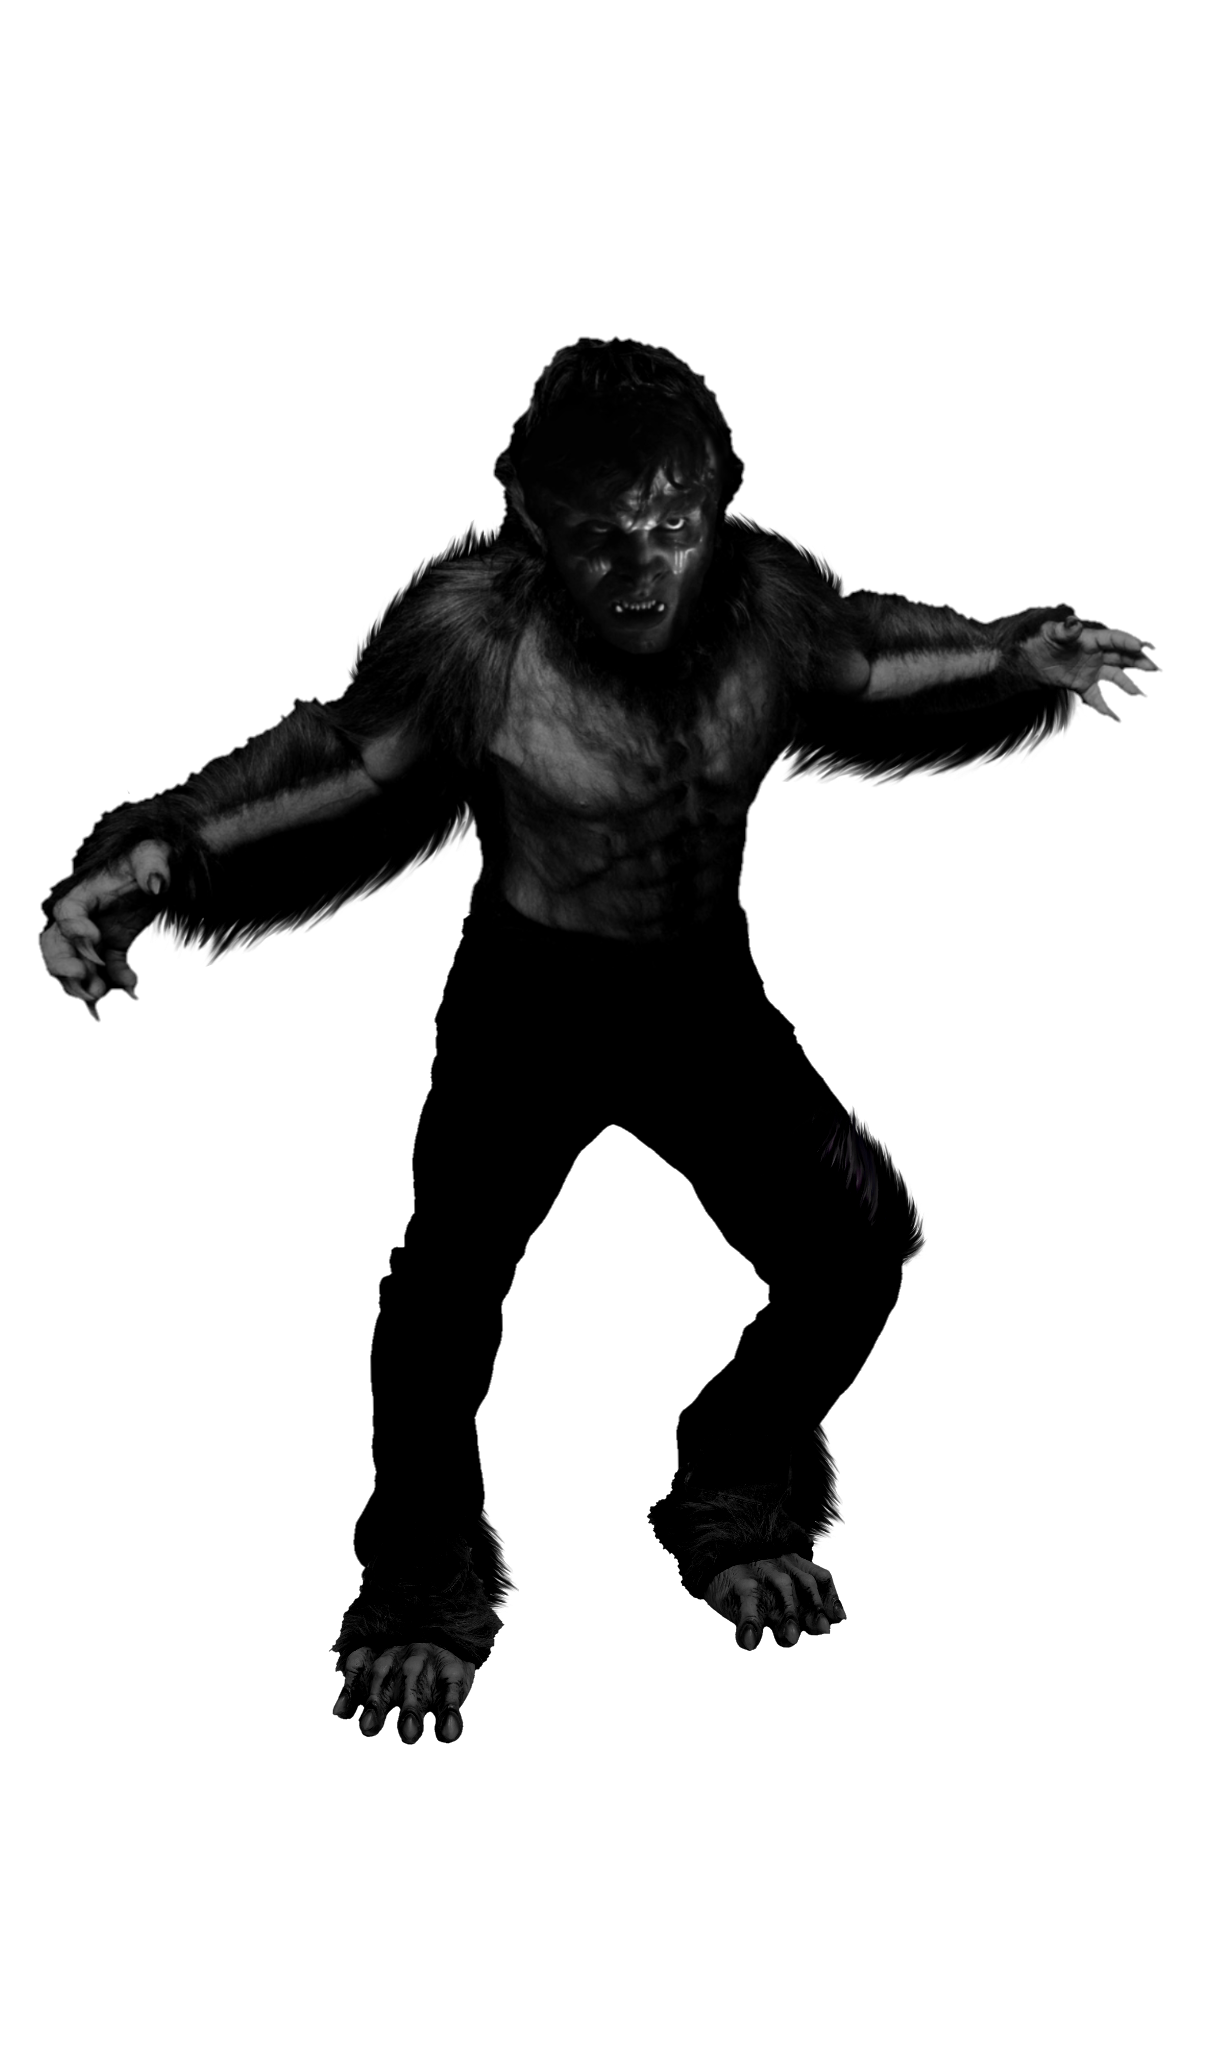 Werewolf By Night (Concept) PNG by ThePngGuy on DeviantArt